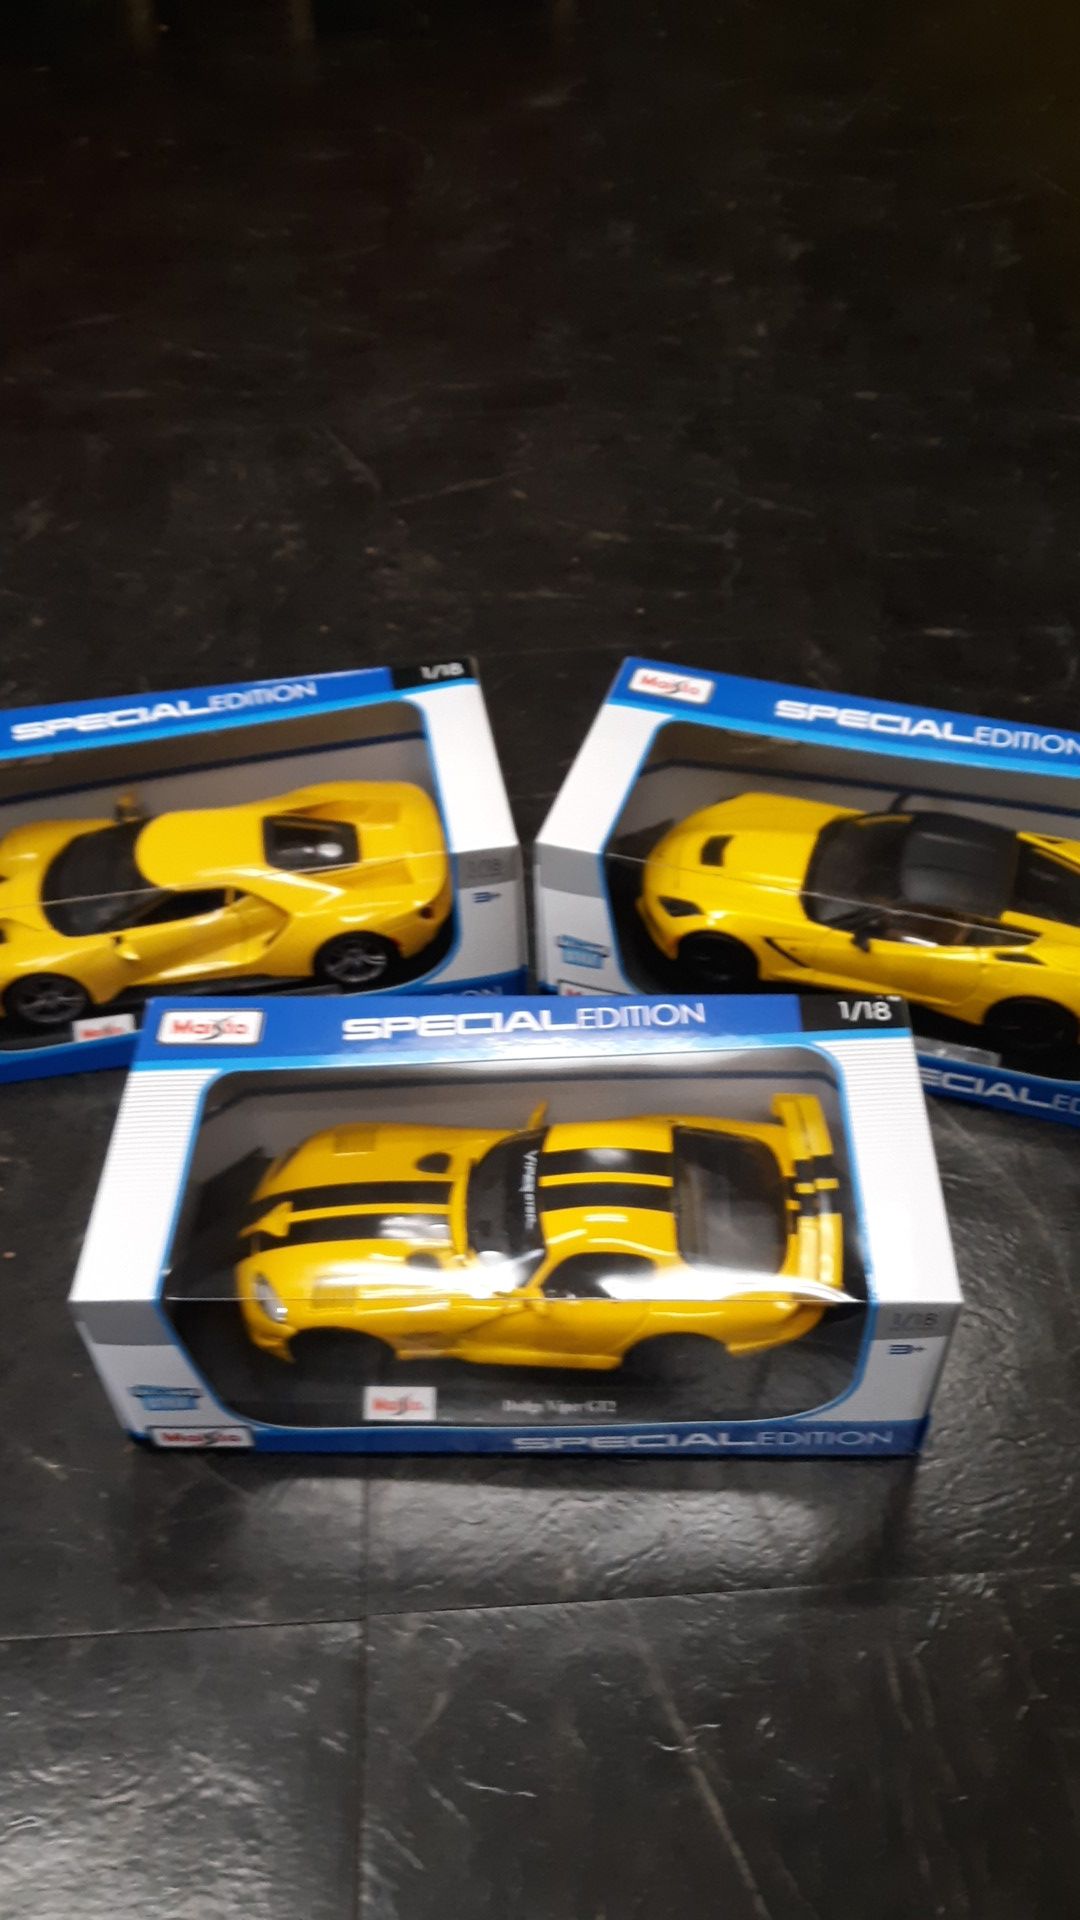 1/18 scale diecast cars